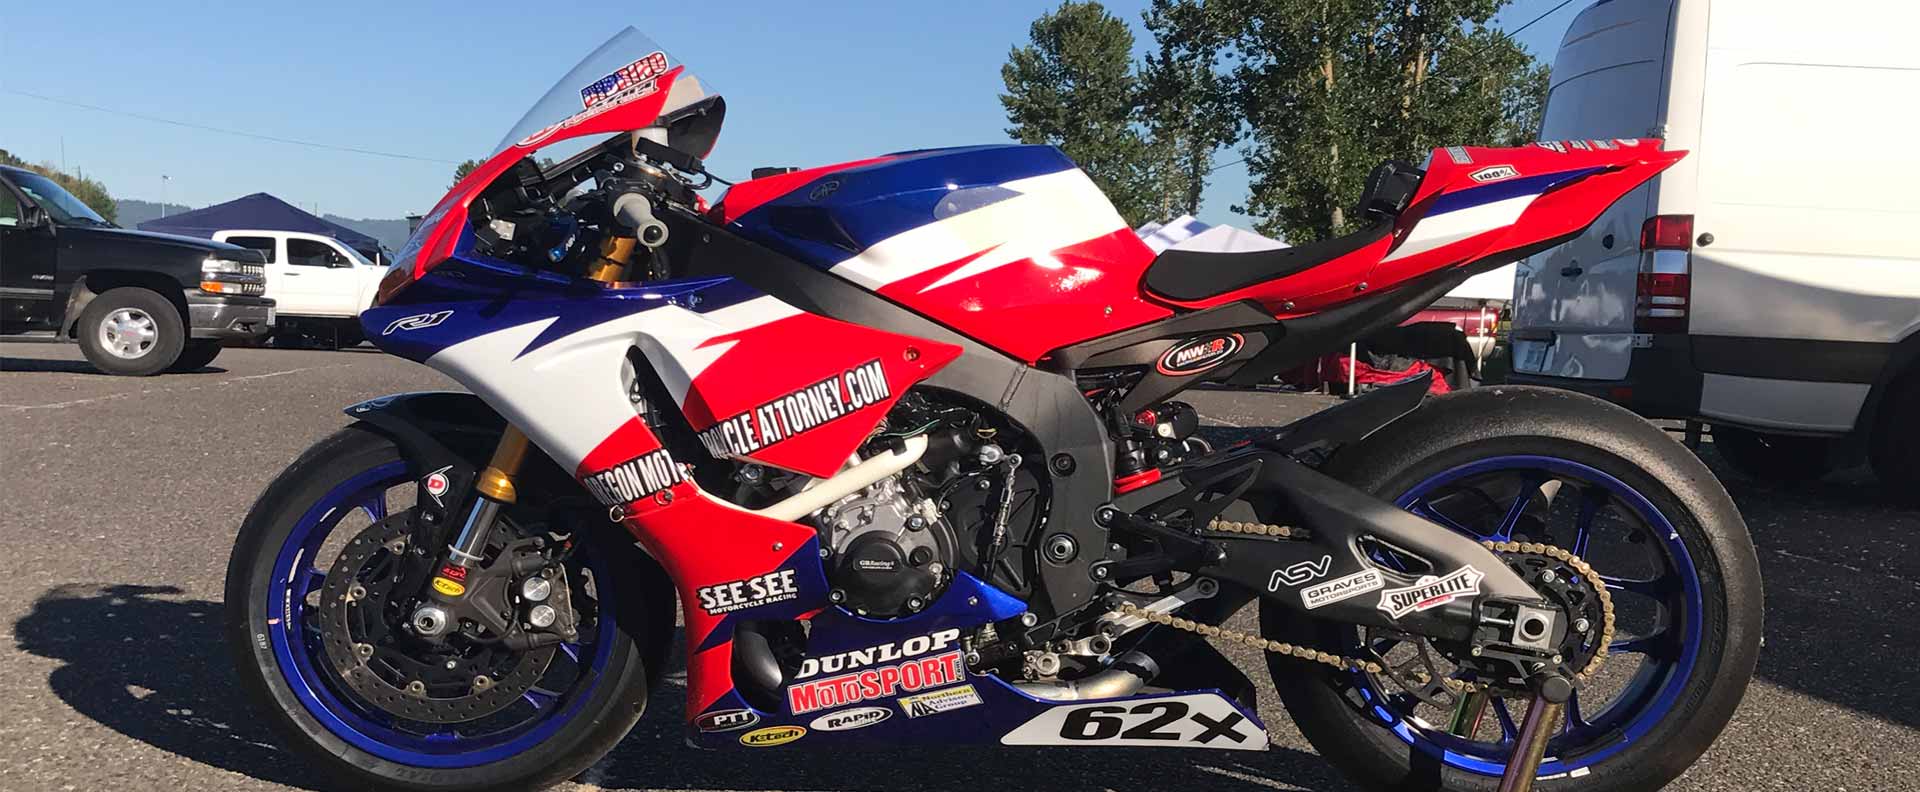 Andy DiBrino Racing R1 motorcycle backed by Oregon Motorcycle Attorney before his crash at  OMRRA round 3 PIR Portland International Raceway